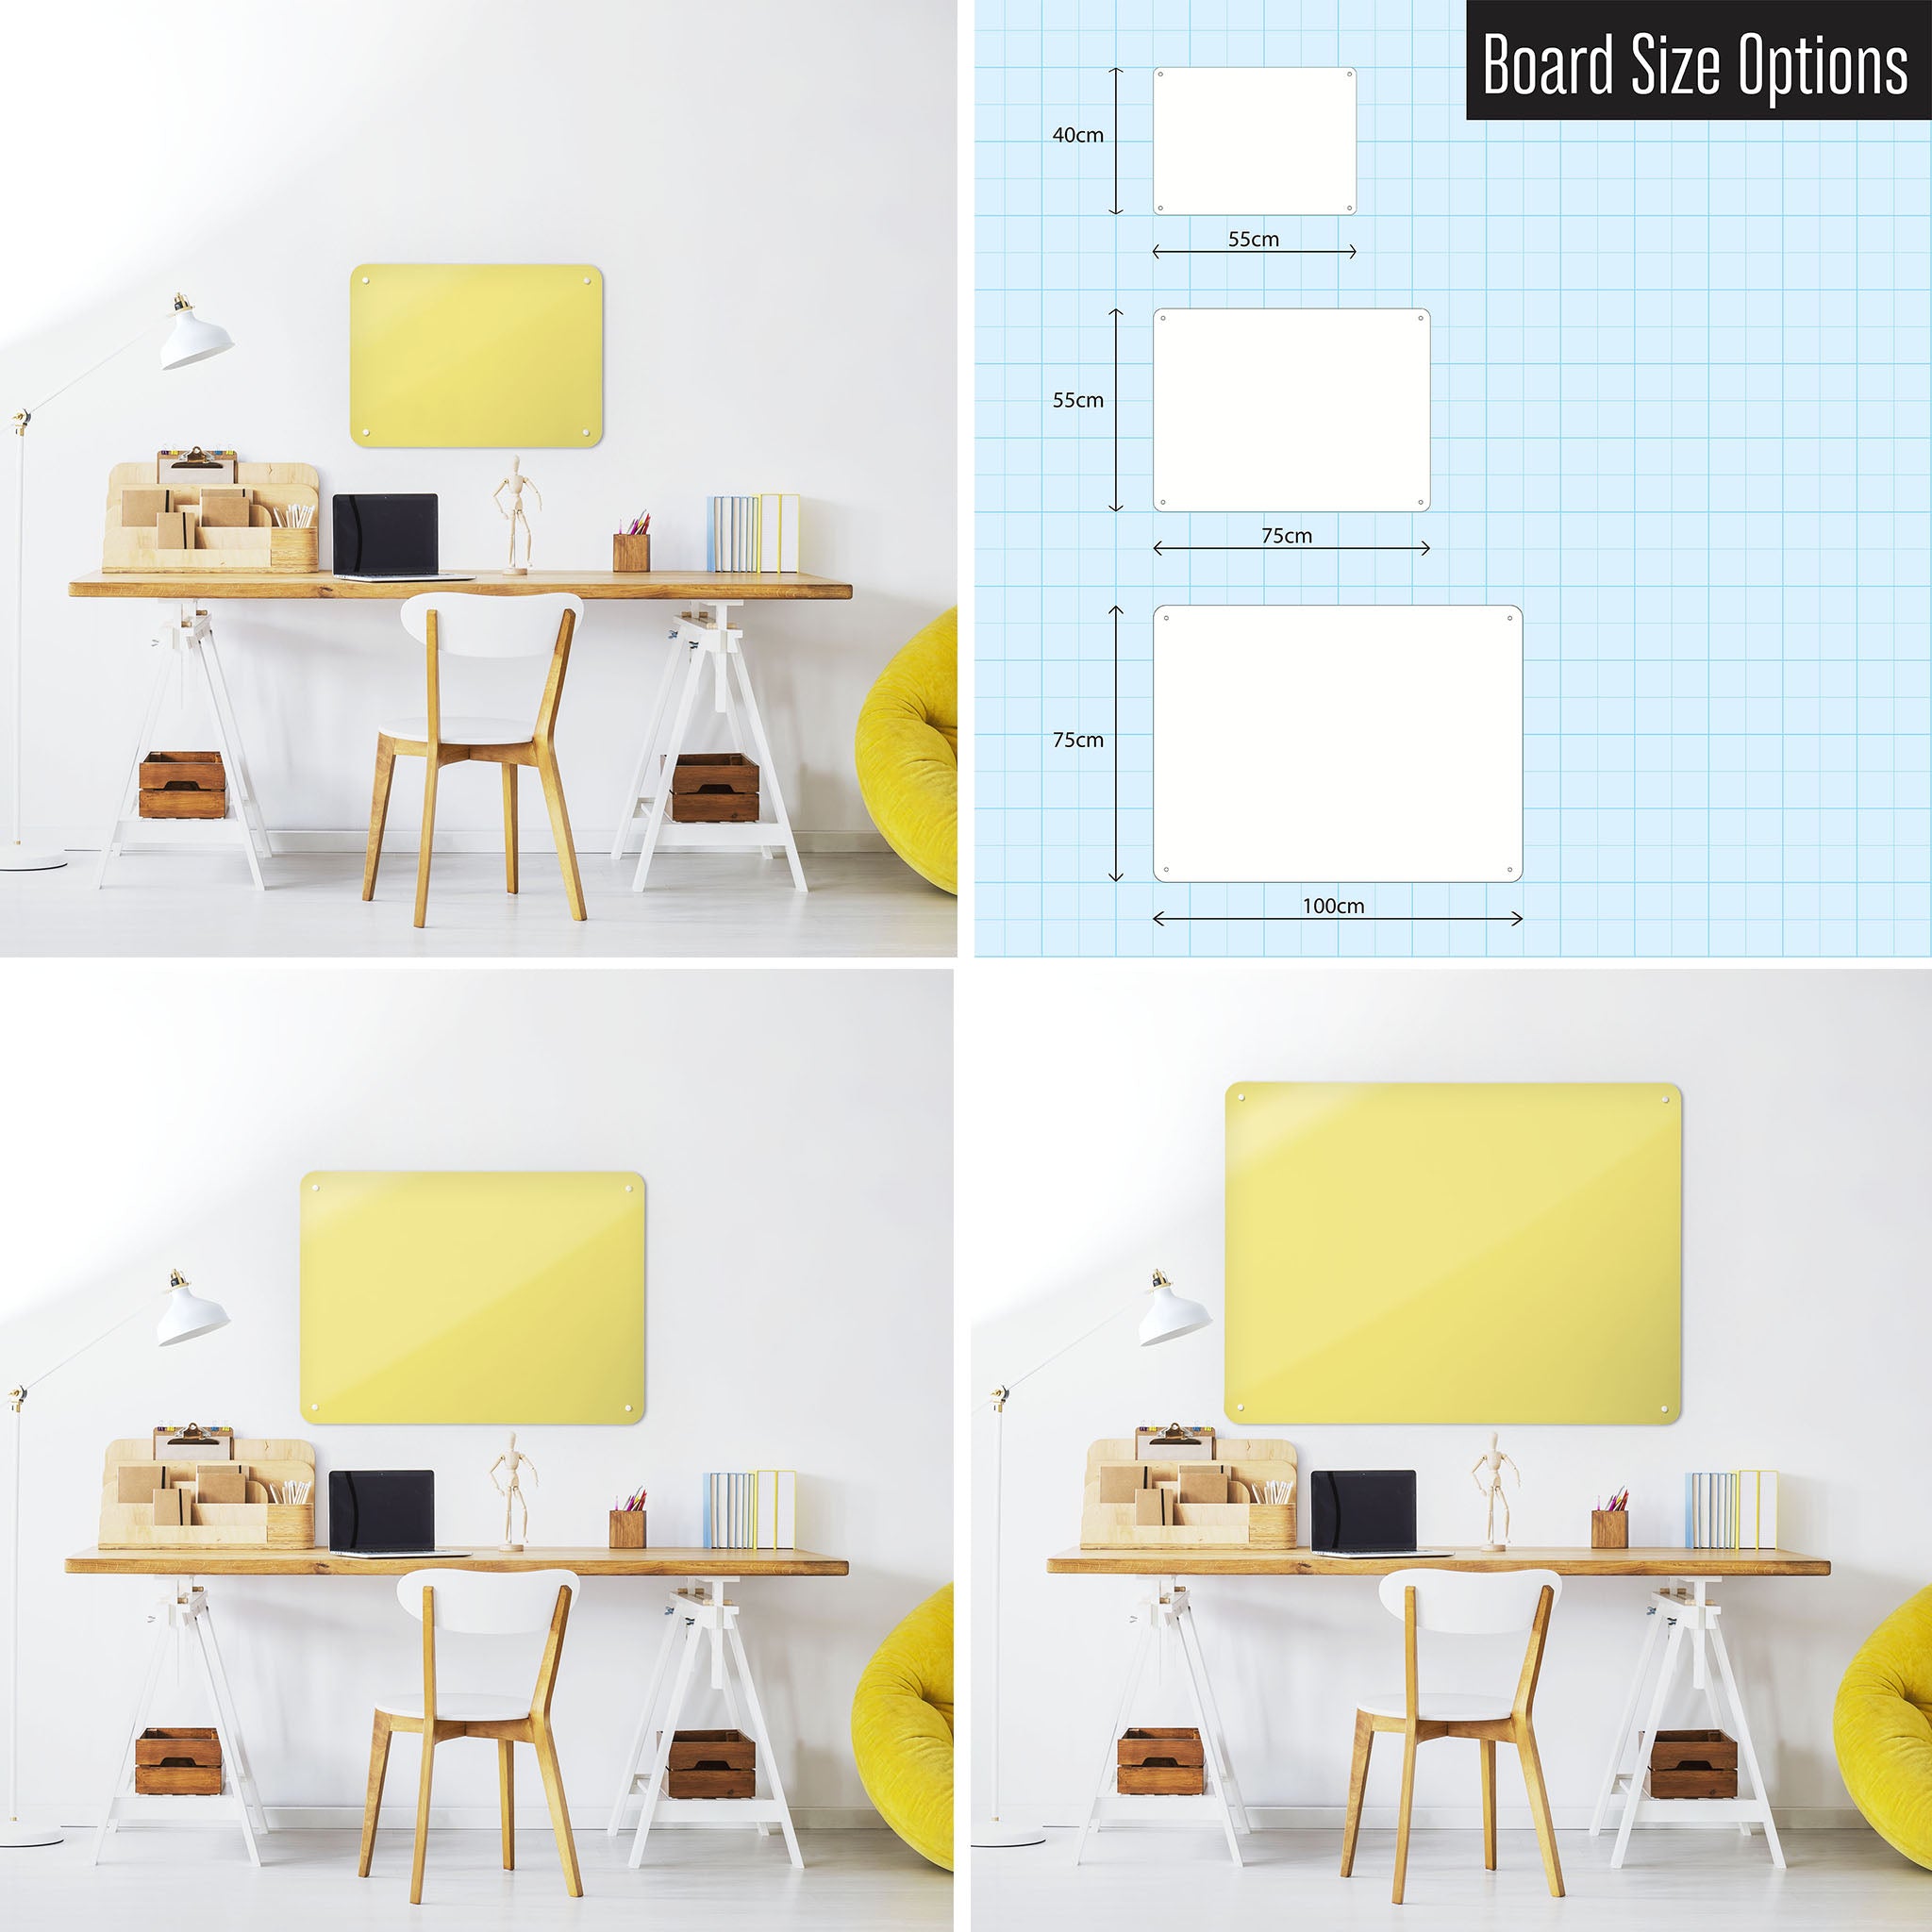 Three photographs of a workspace interior and a diagram to show size comparisons of a plain yellow magnetic notice board